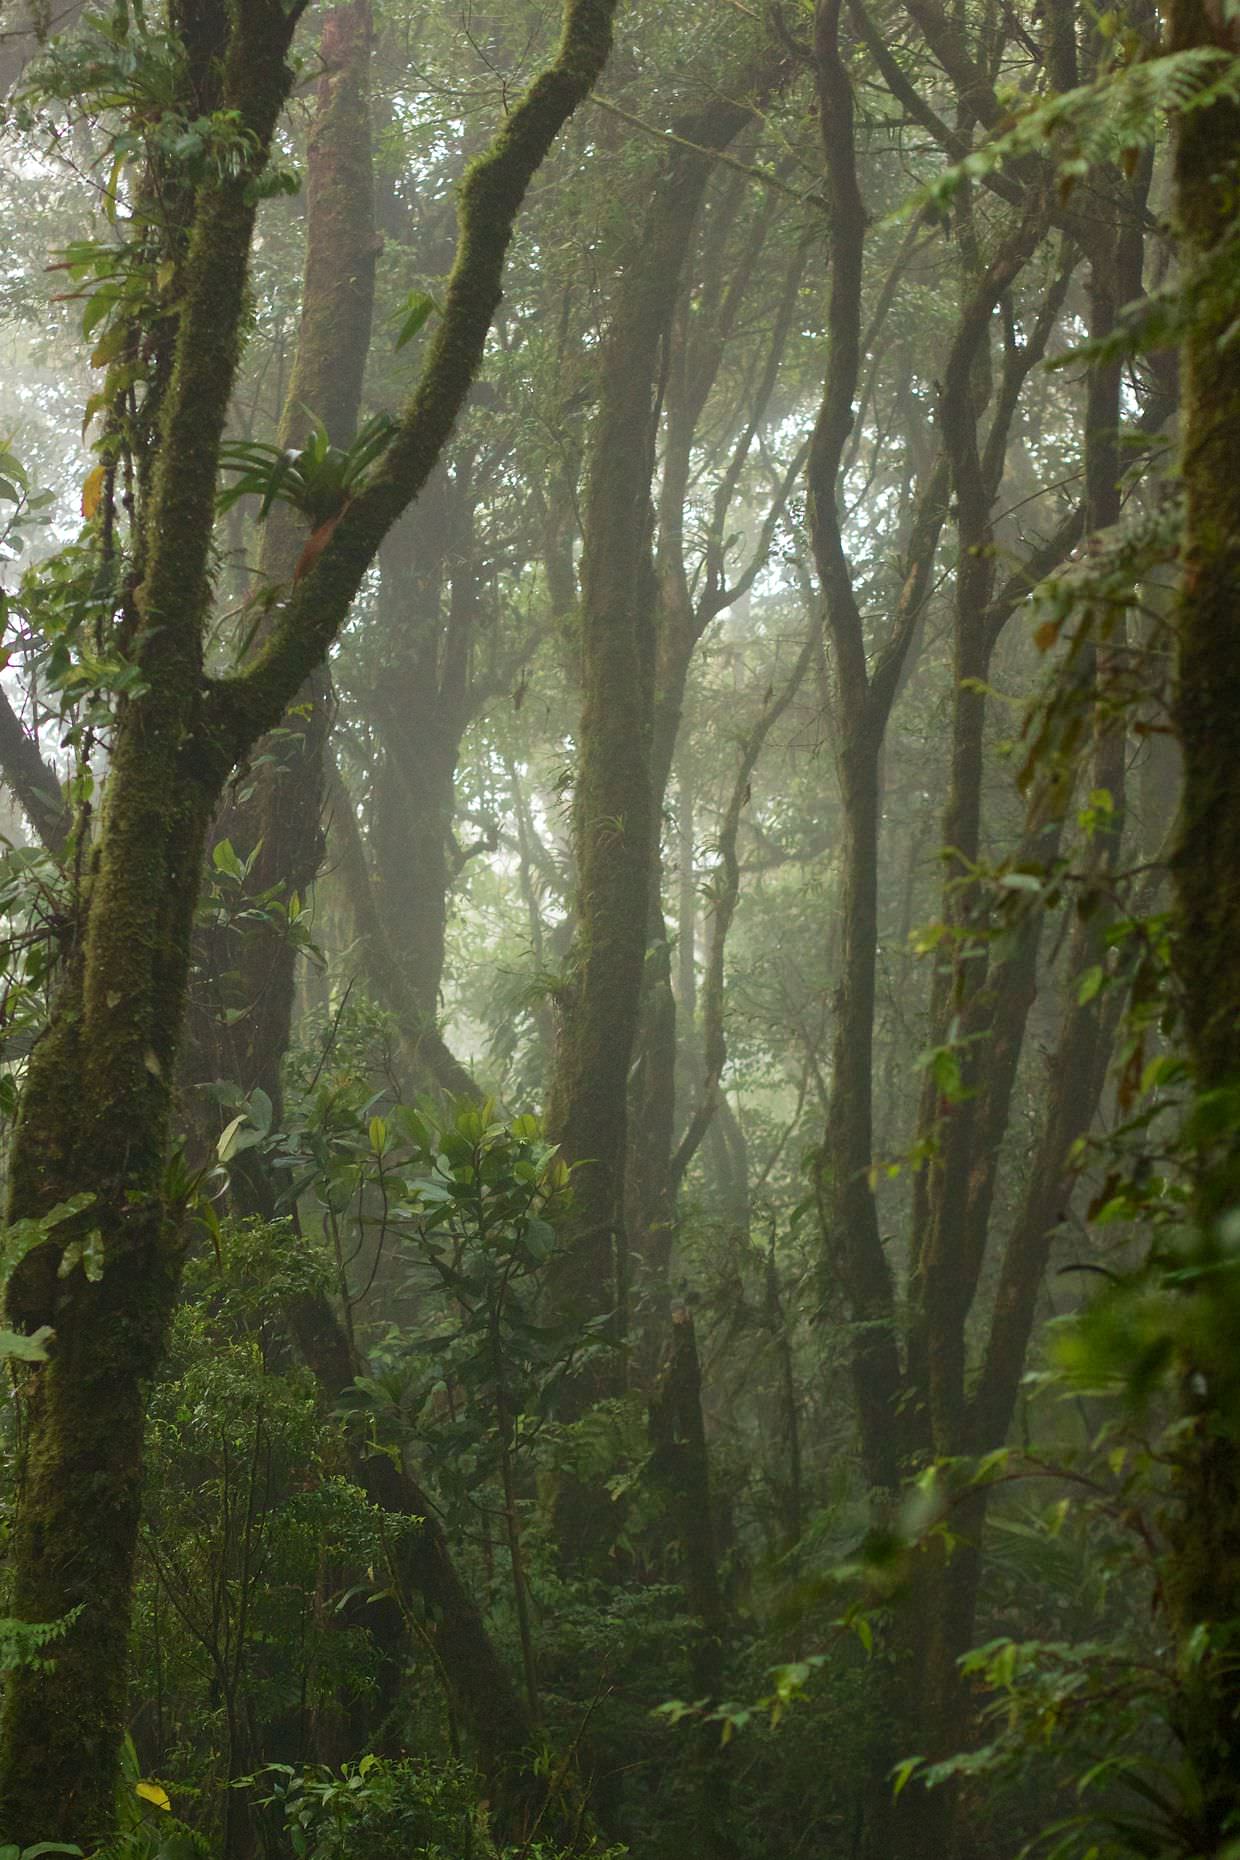 The magical cloud forest